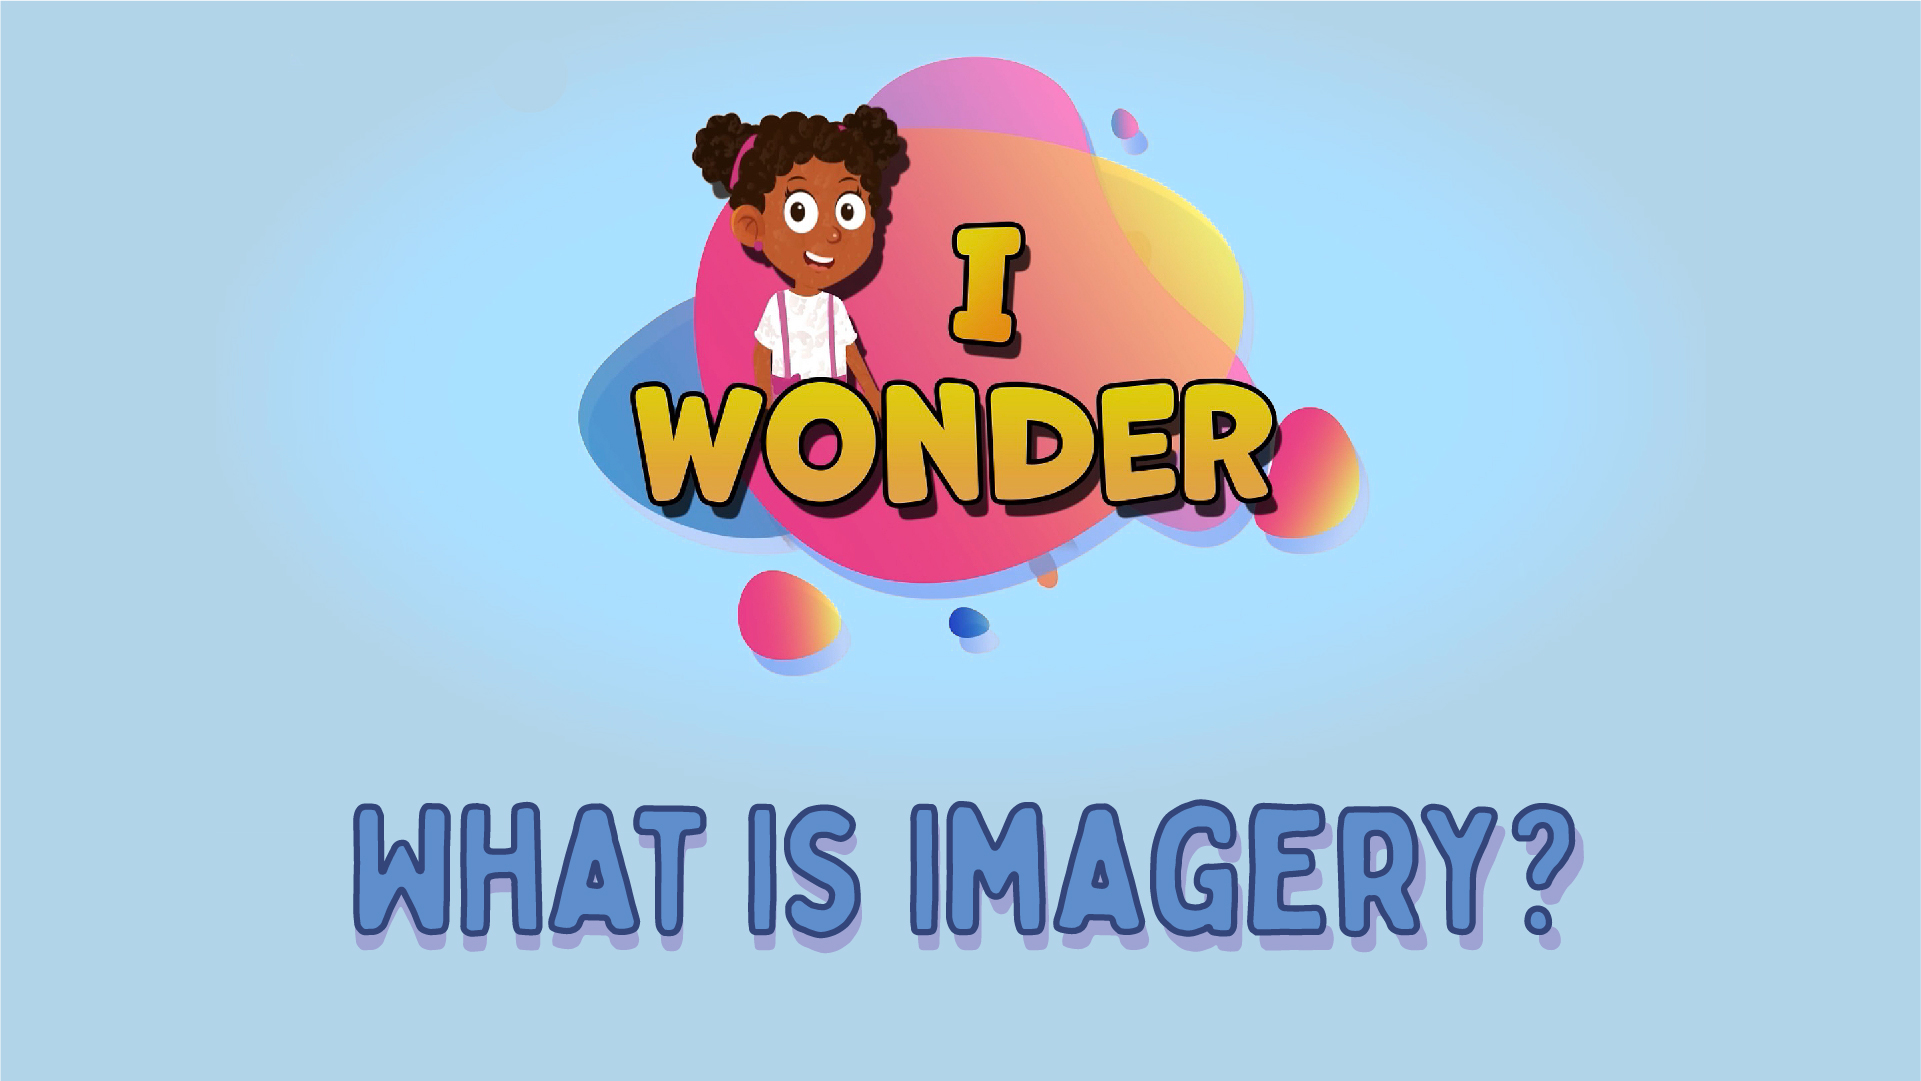 What Is Imagery?